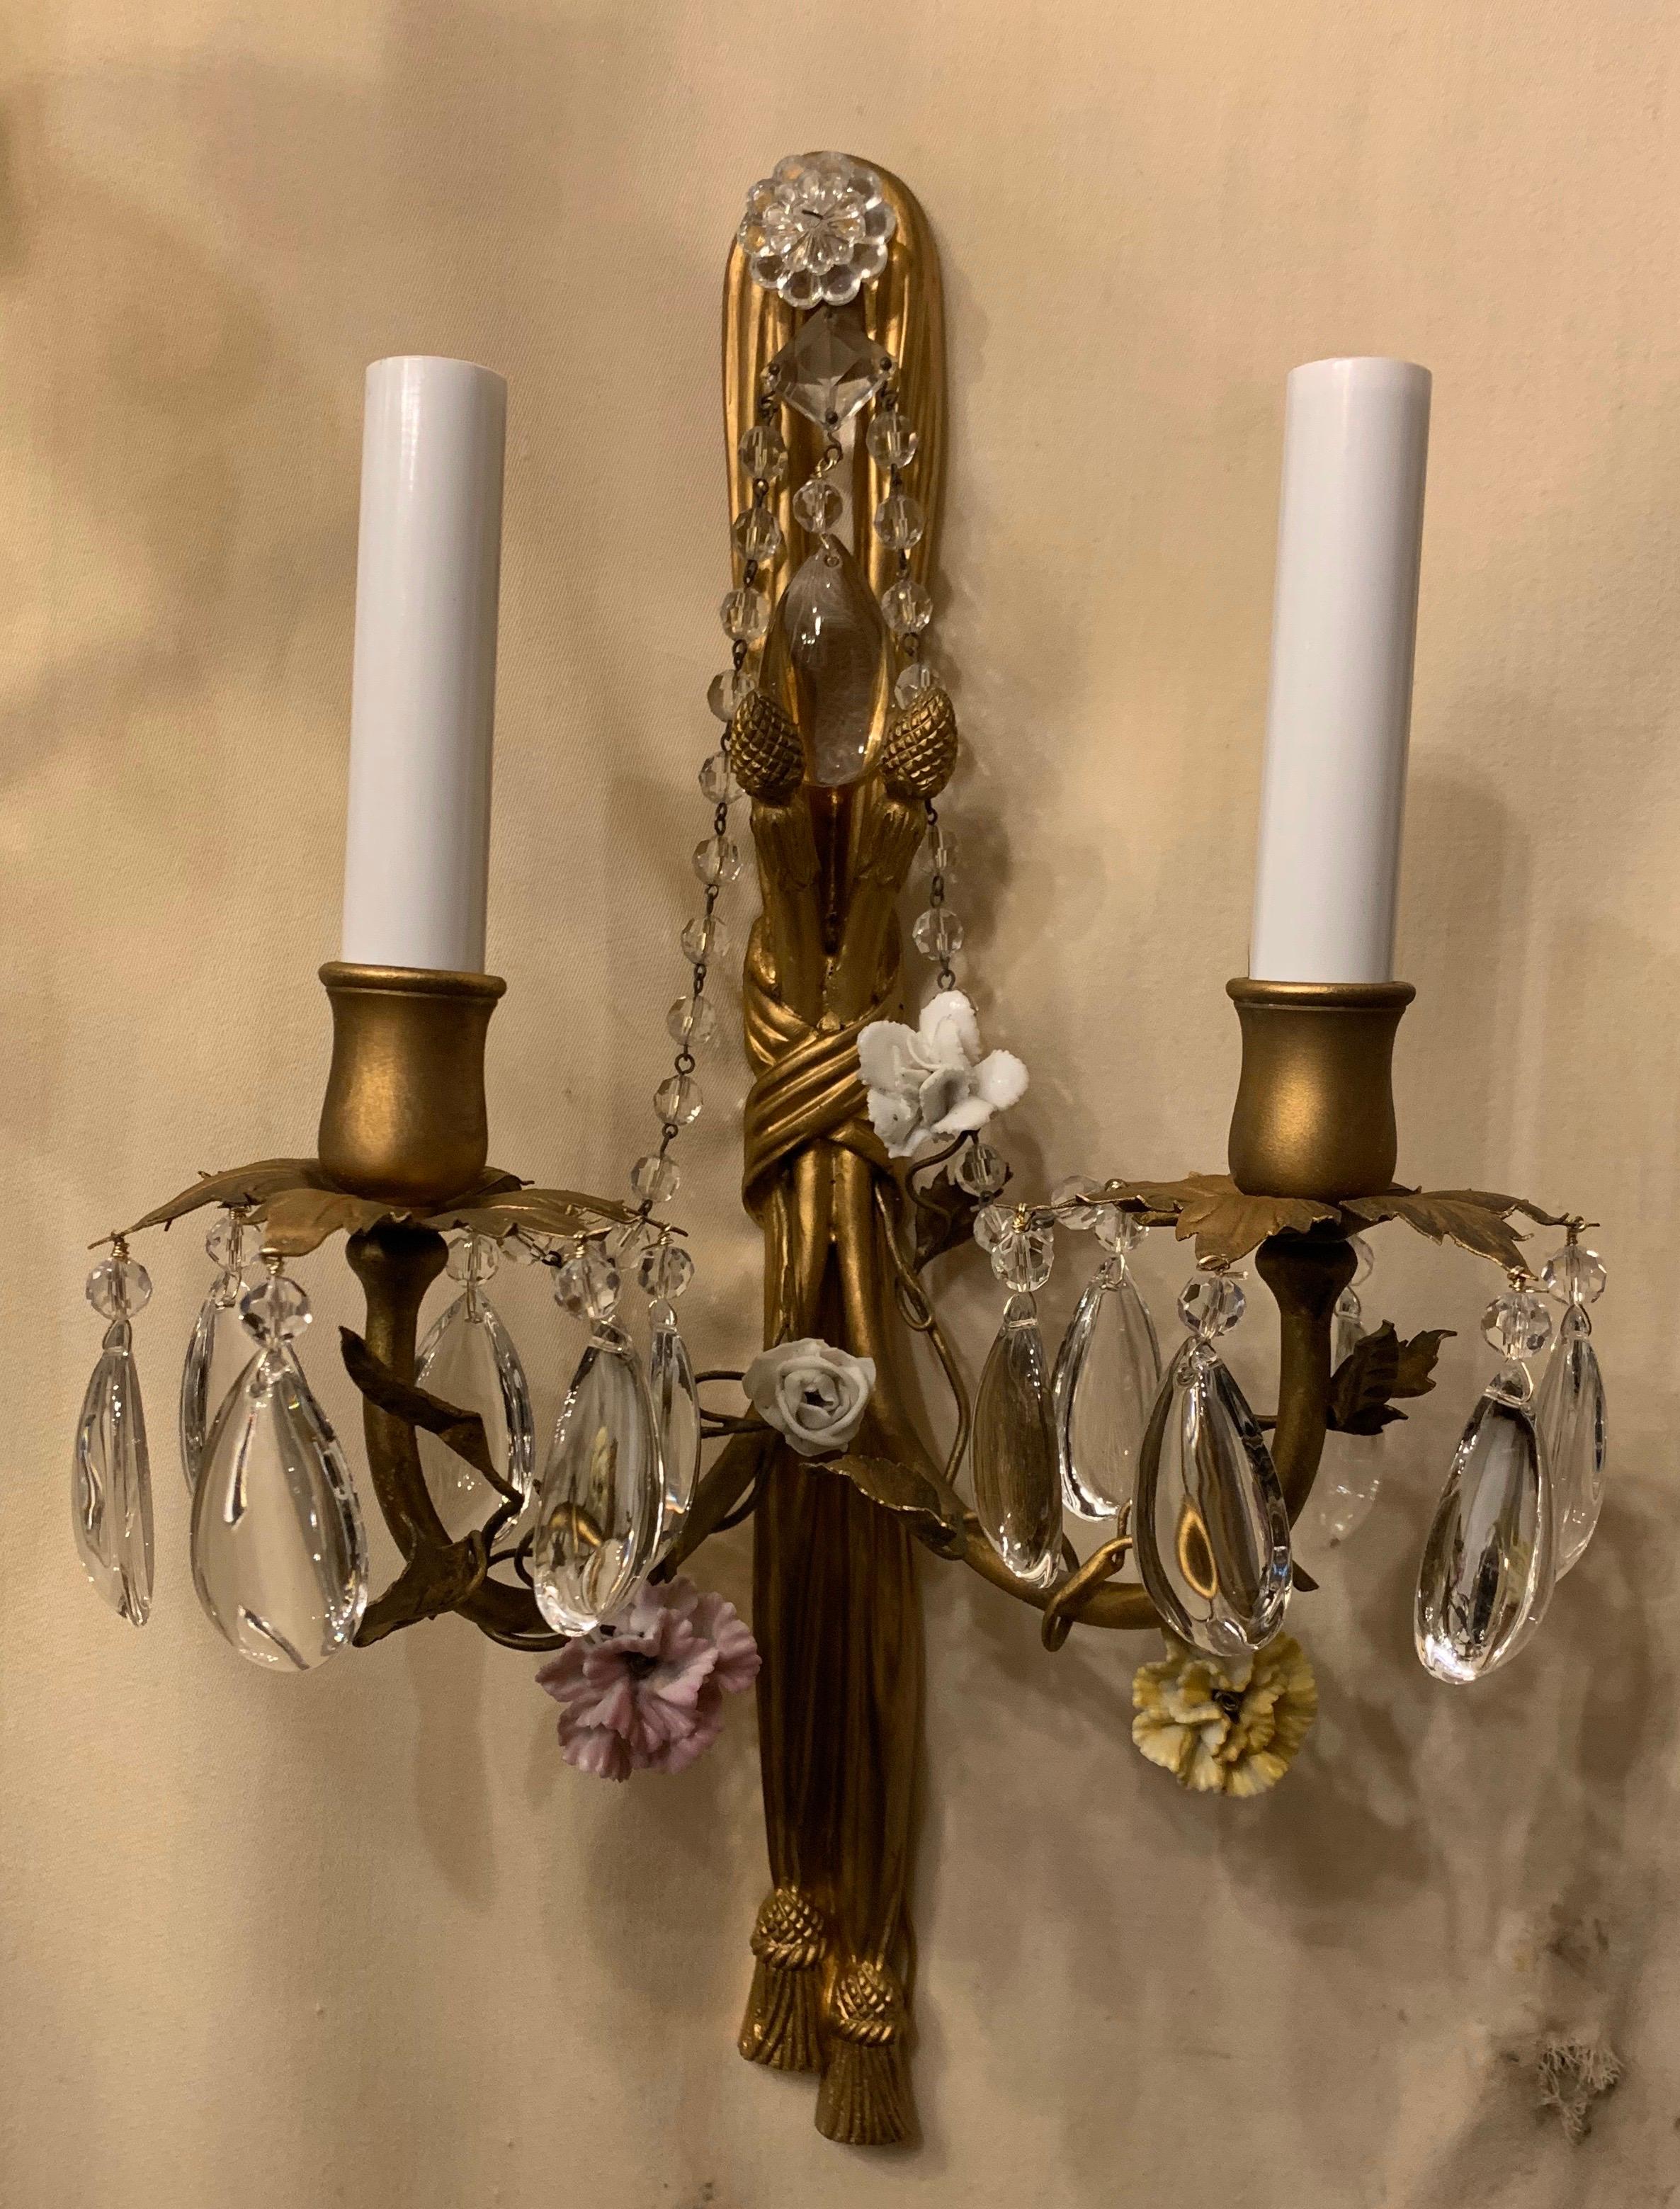 A Wonderful Pair Of French Dore Bronze Tassel For Crystal Drop & Porcelain Flower Sconces With Beaded Swags, Rewired Each With Two Candelabra Sockets And Ready To Install